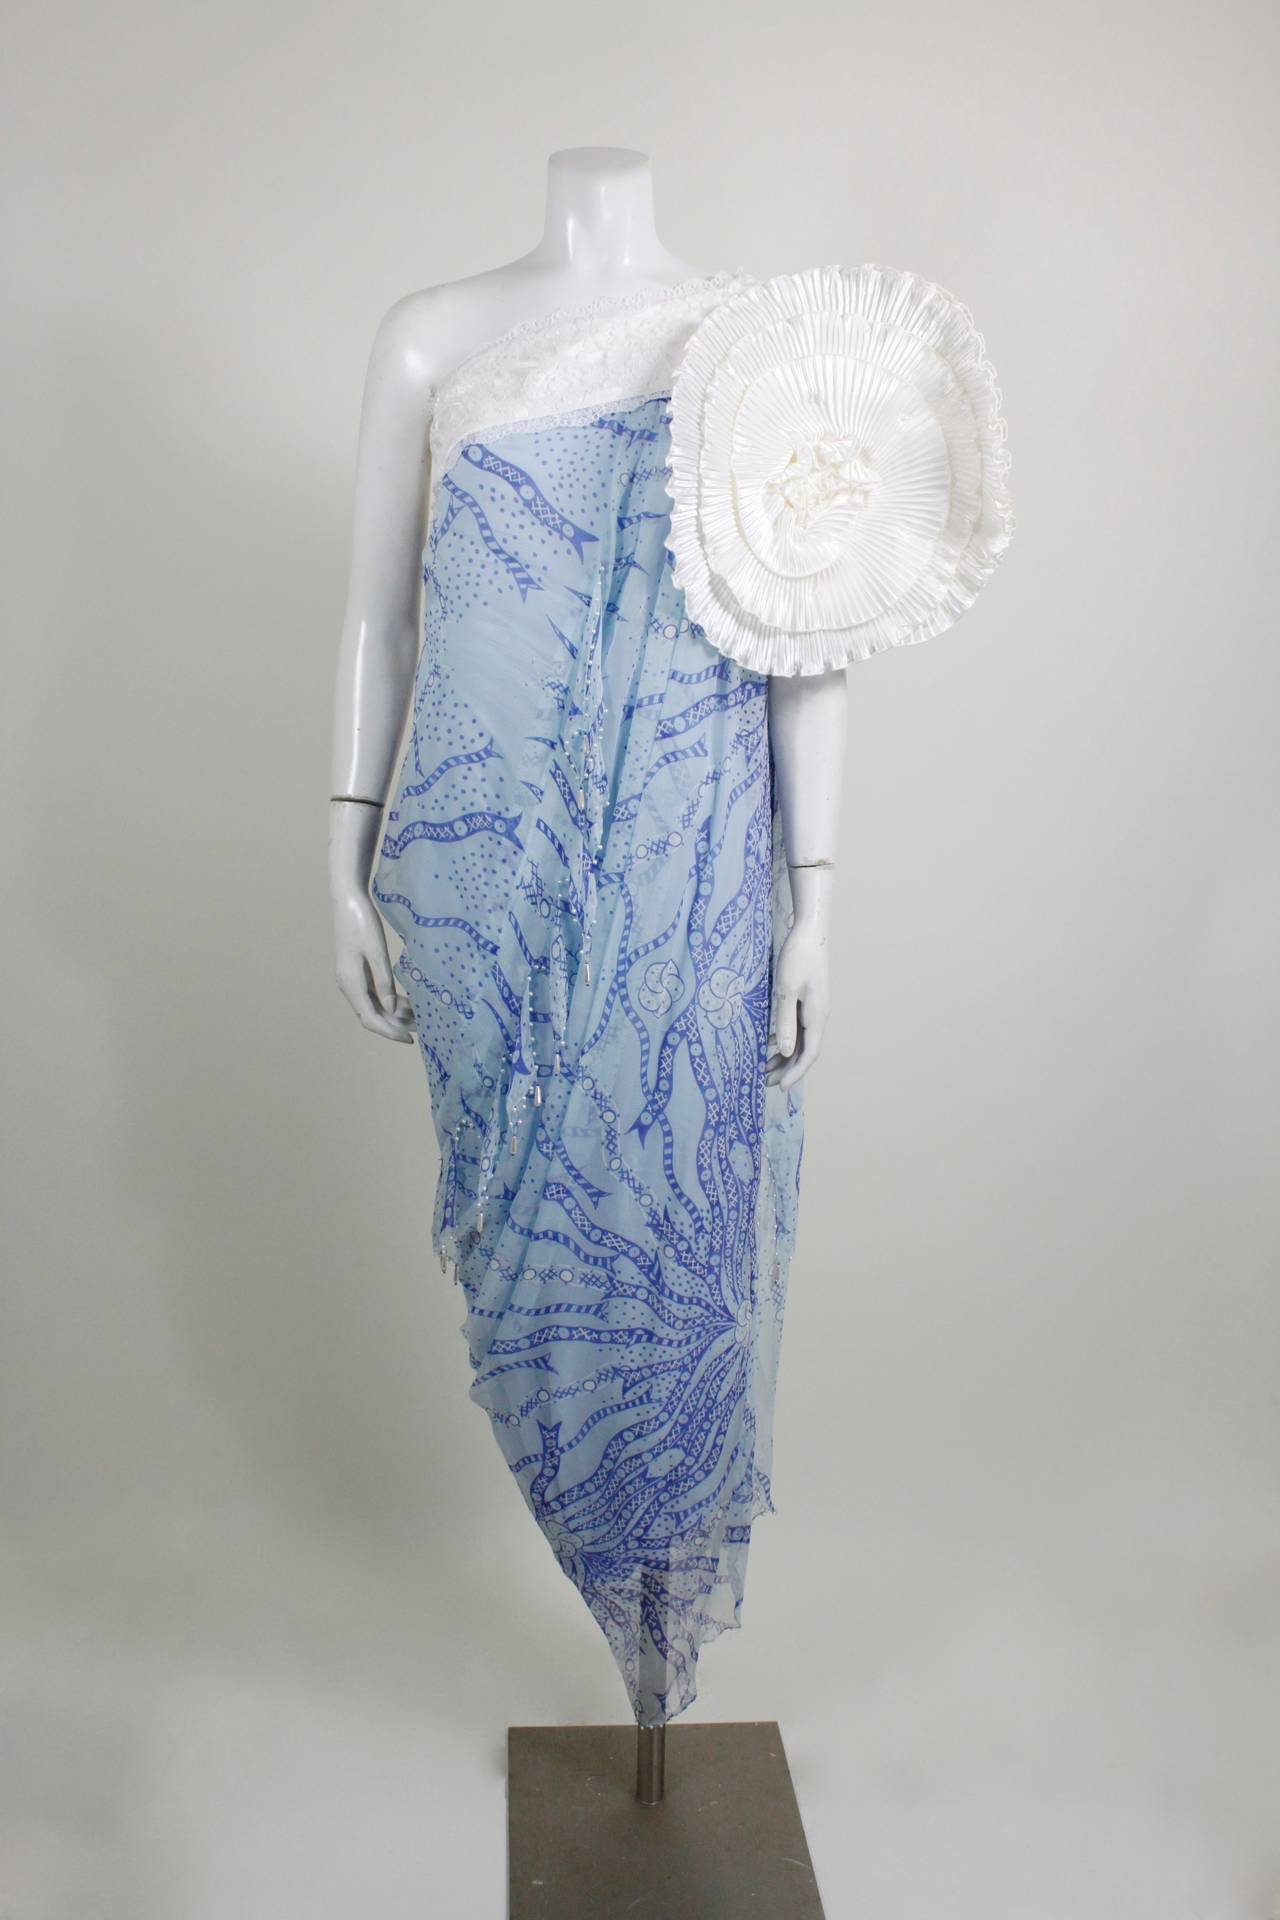 1980s Zandra Rhodes Asymmetrical Evening Gown One shoulder with oversized  applique on draped blue printed chiffon. With dangling pearl fringe. Small repair - step through at longest part of hem - not noticeable when worn.